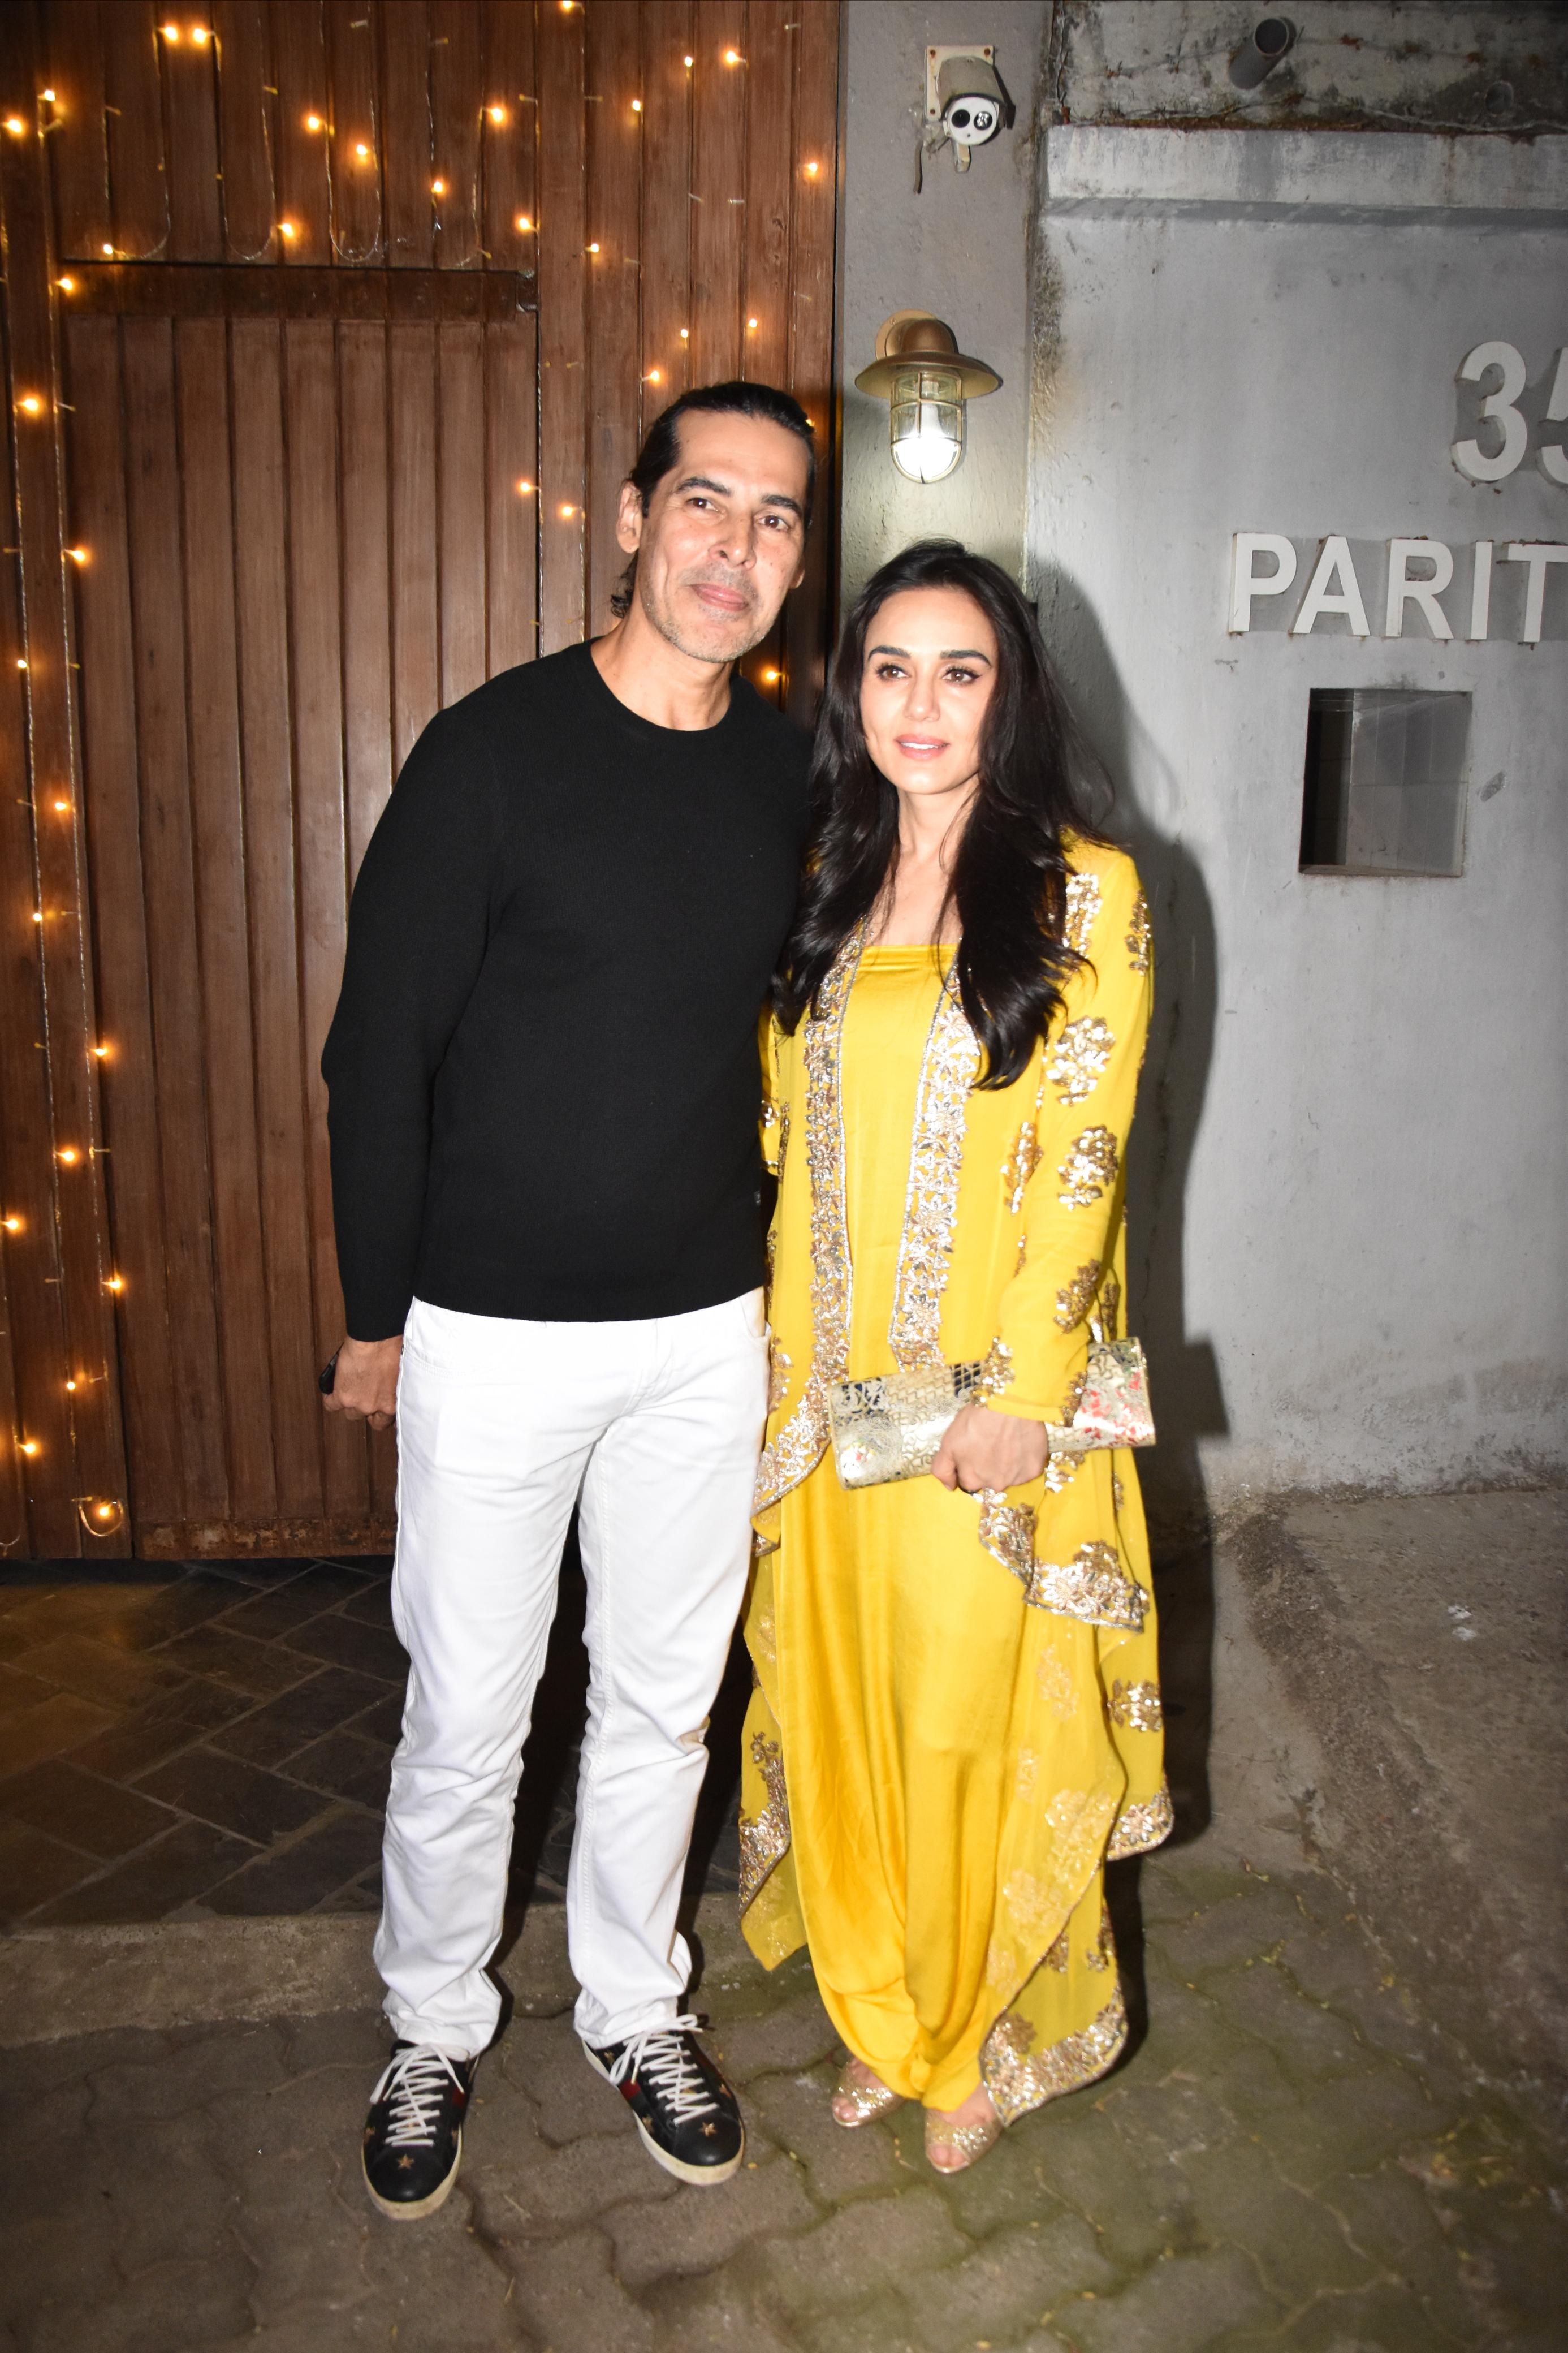 Preity Zinta was also clicked in the city last night. The actress opted for yellow kurta set as she attended a party 